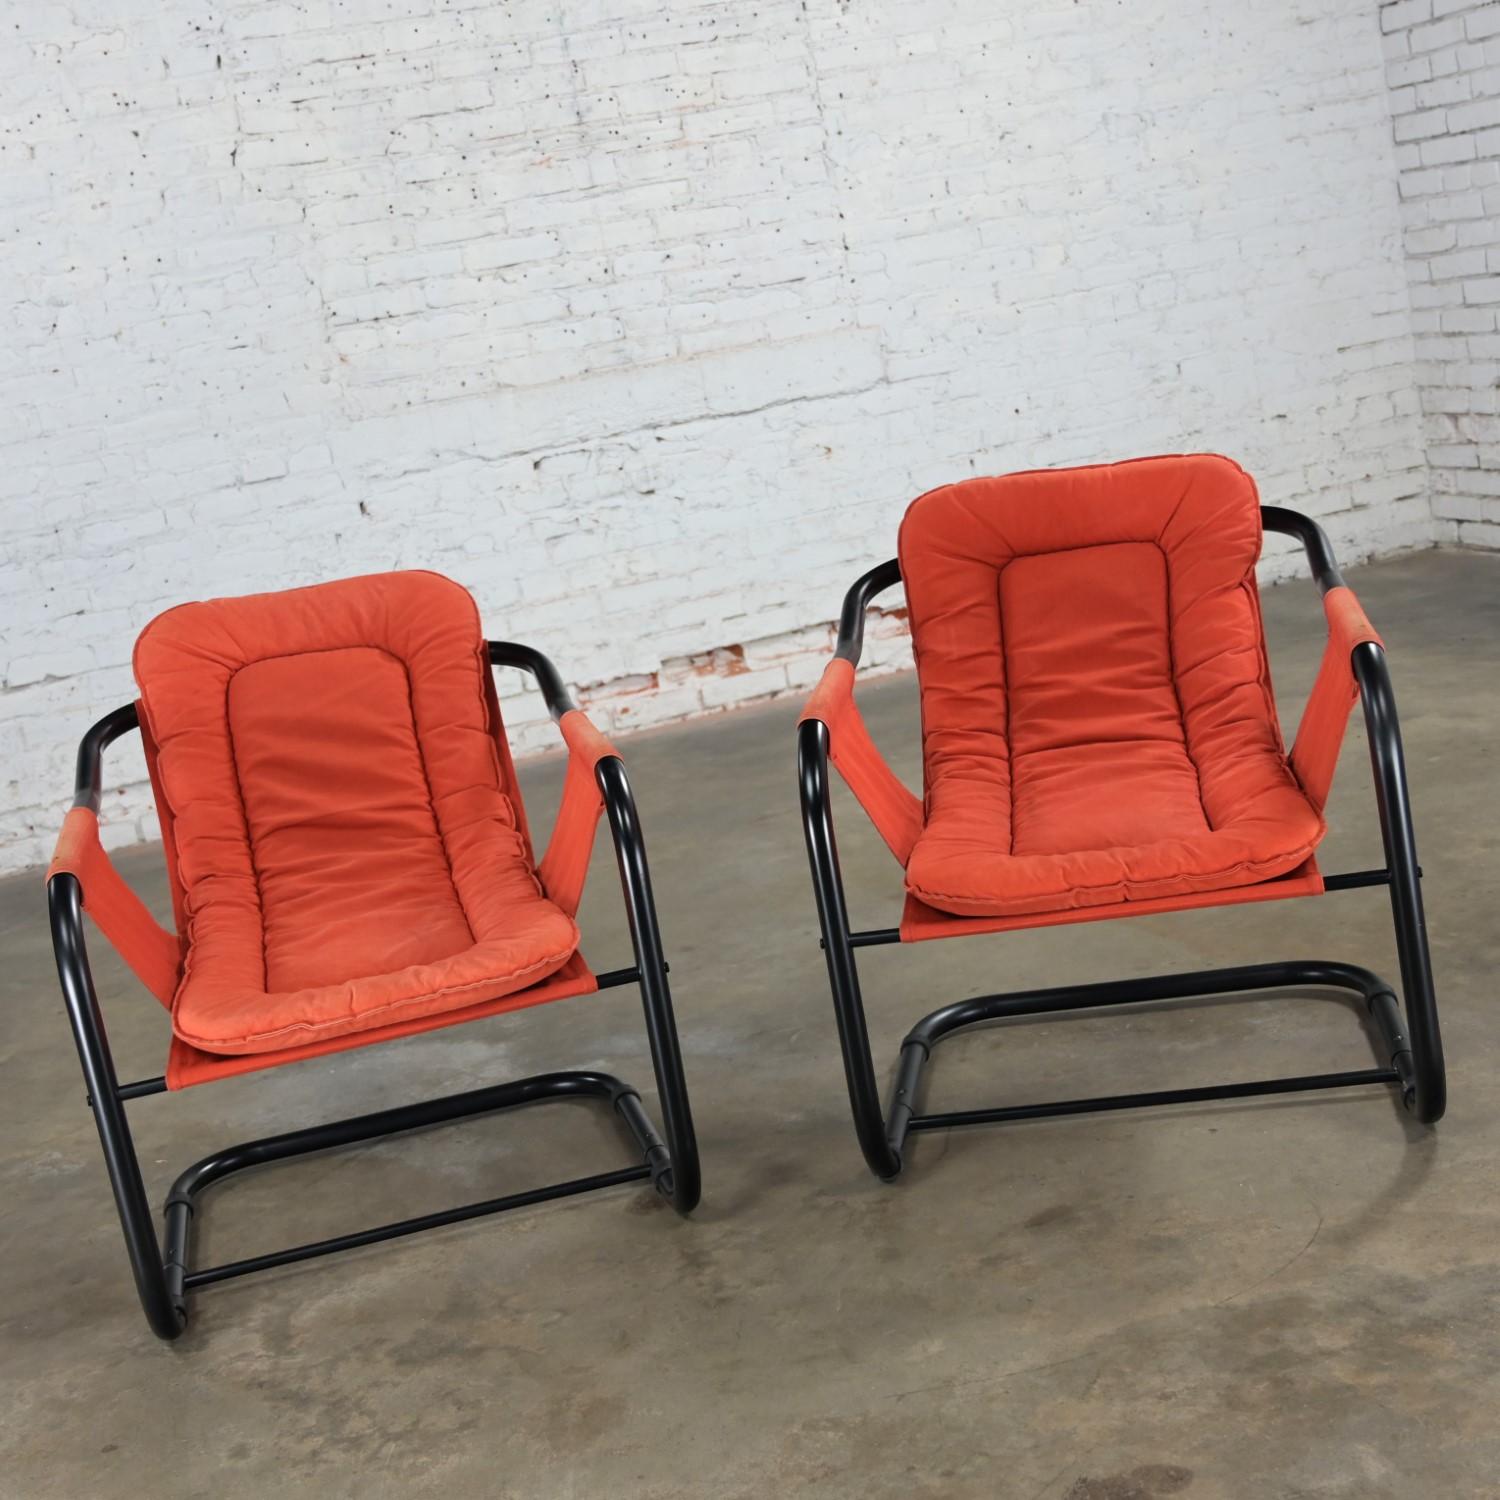 Incredible vintage Modern orange & black painted tube cantilever sling lounge chairs in the style of Jerry Johnson, a pair. Beautiful condition, keeping in mind that these are vintage and not new so will have signs of use and wear even if it has